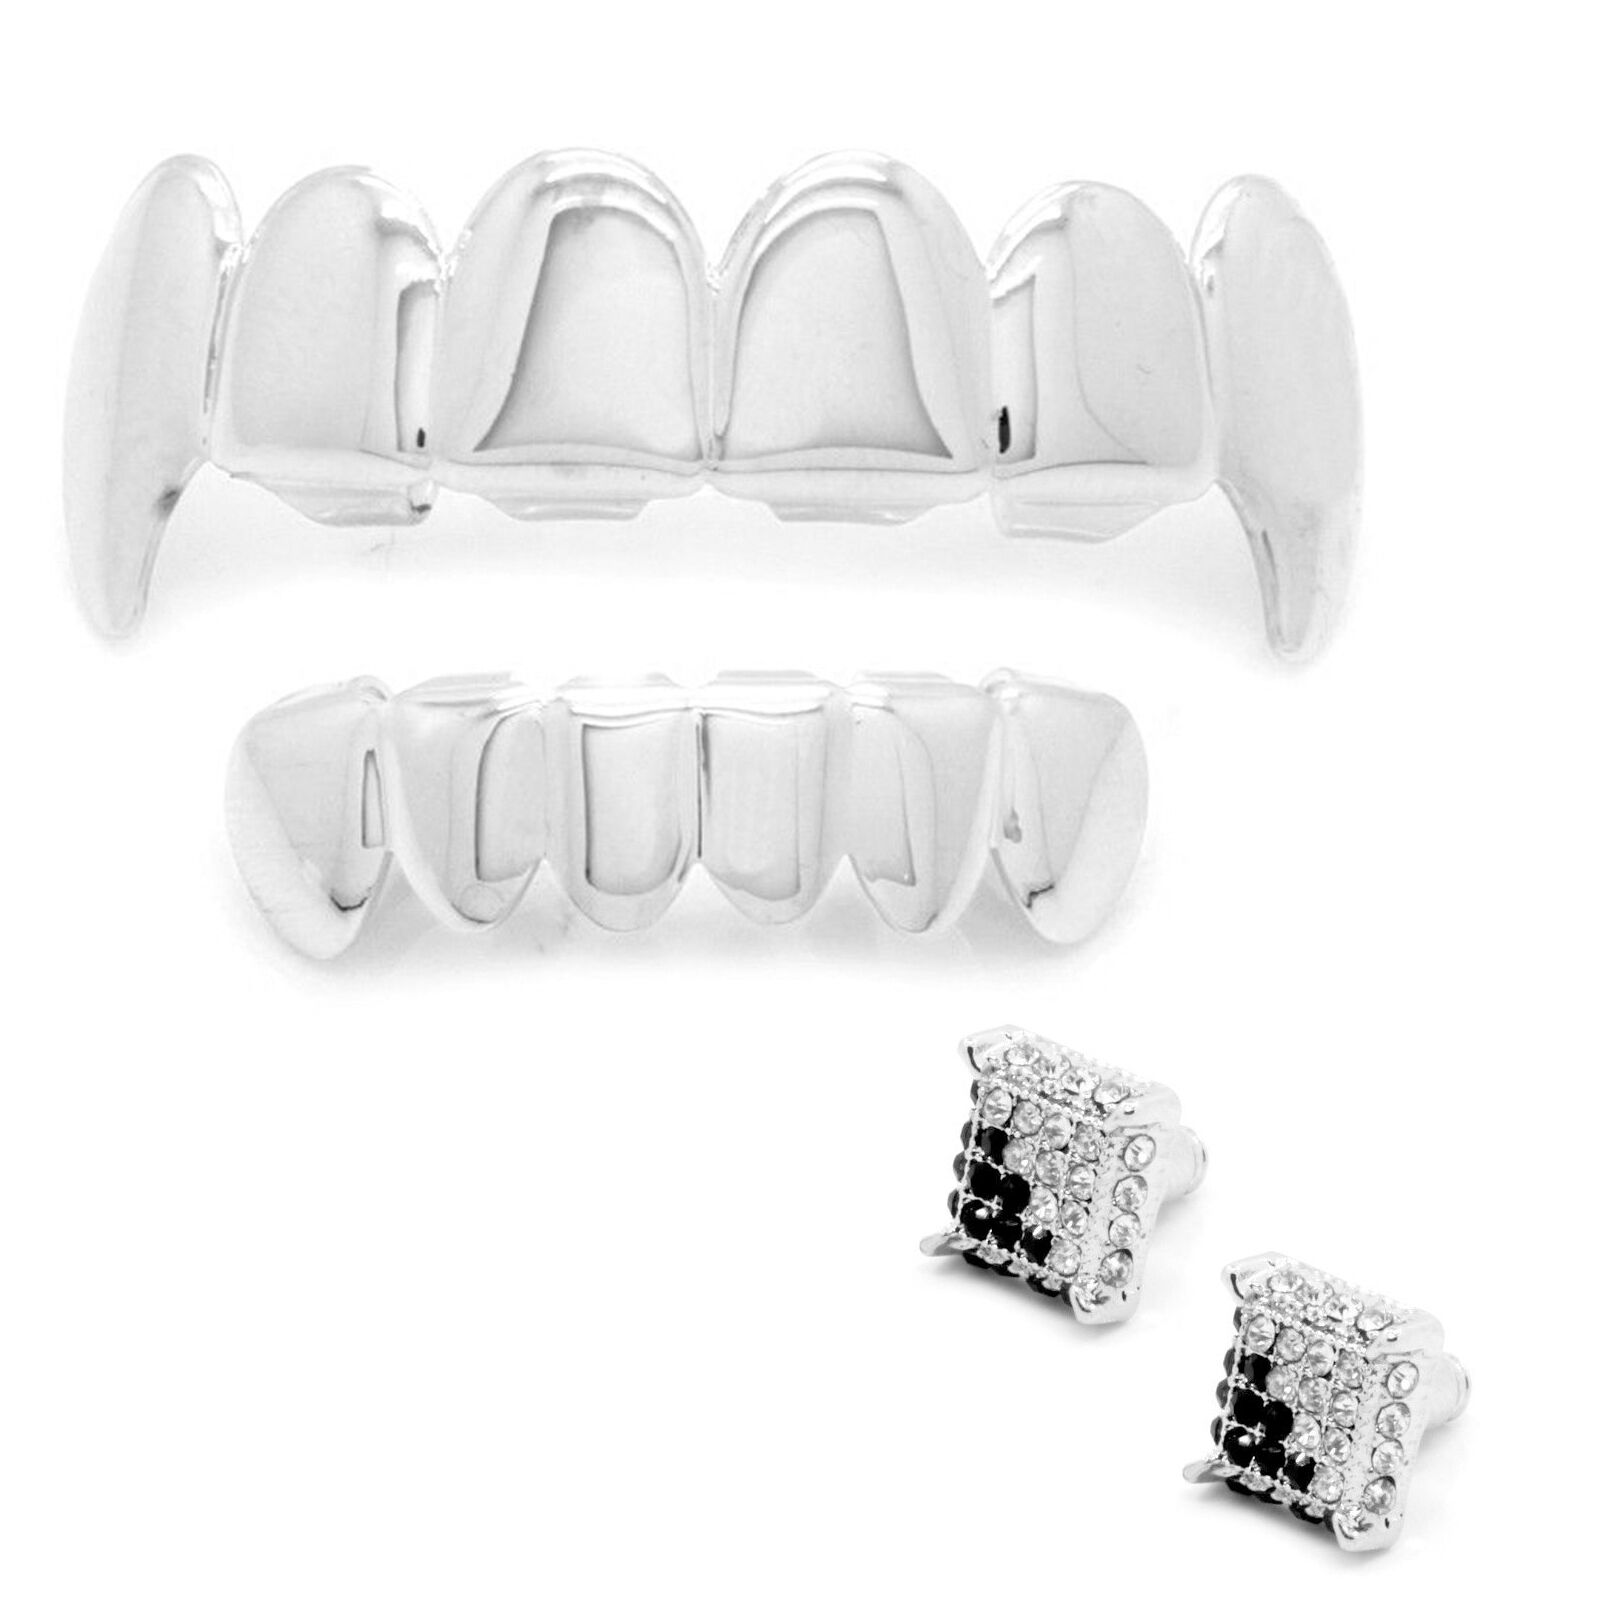 Silver Plated Hip Hop Teeth Grillz Top Fang & Bottom Set & Micro Pave Earrings